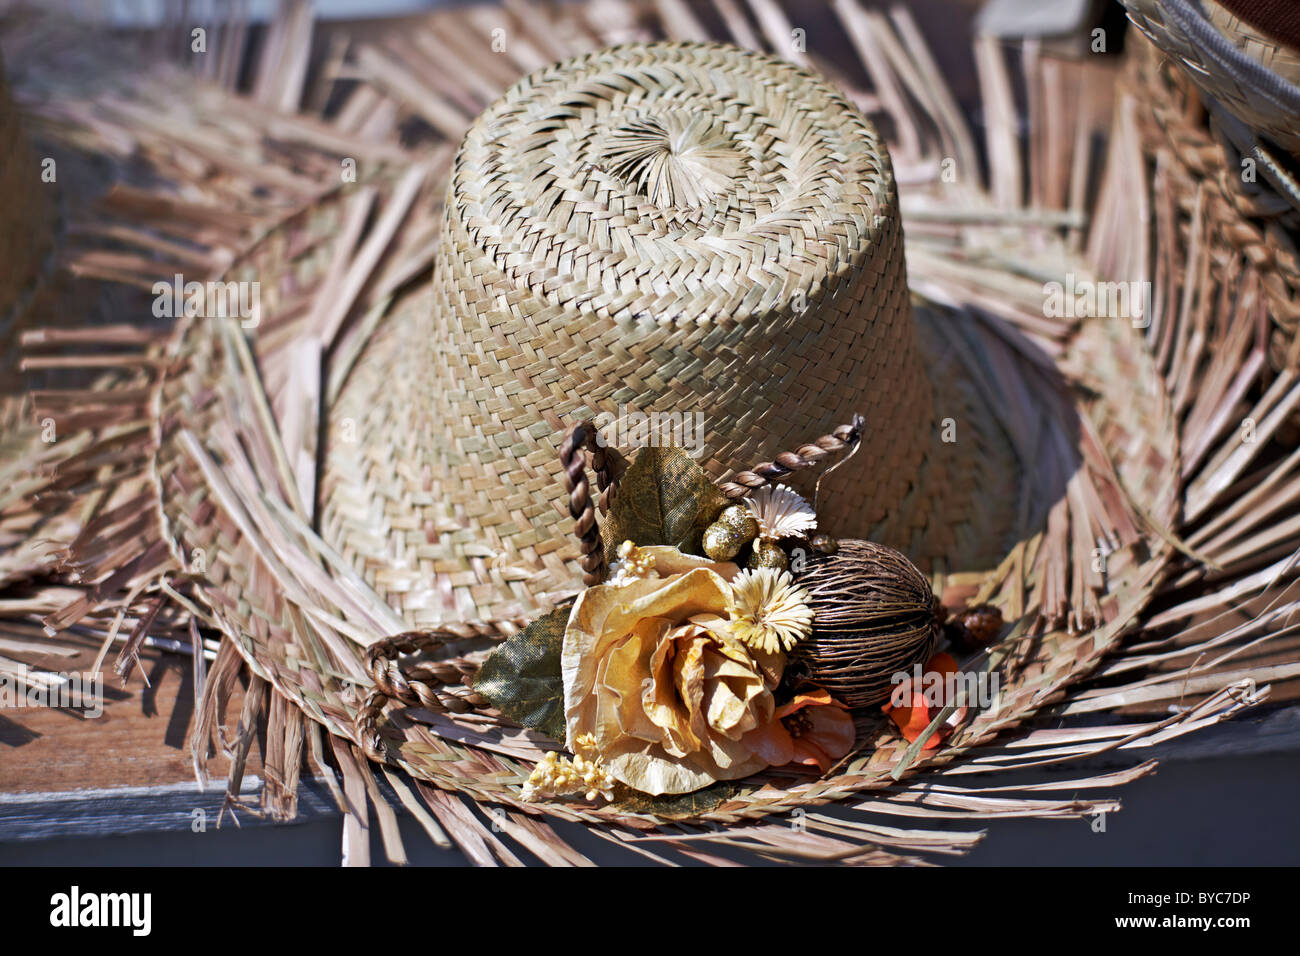 Tattered Straw hat and embellishments at a tropical location. Thailand S. E. Asia Stock Photo